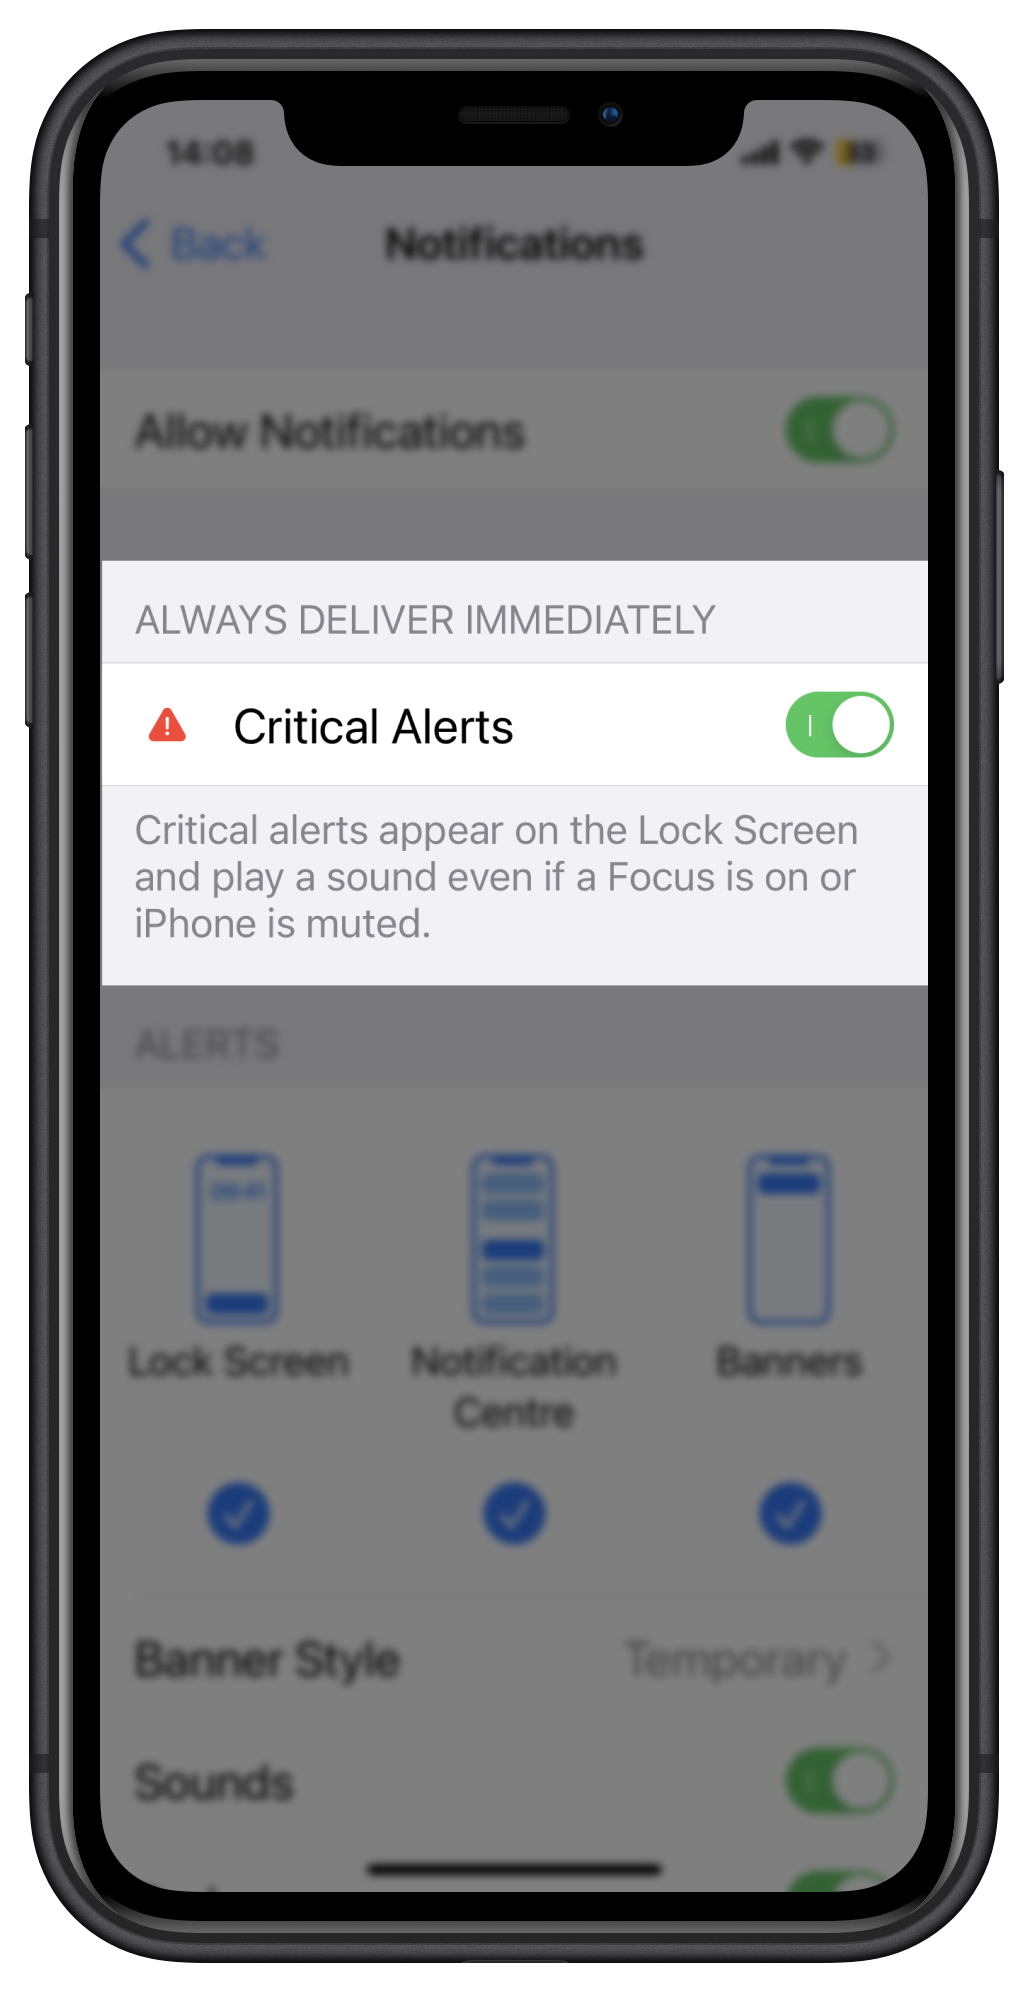 Enable or disable Critical Alerts via iOS device settings.